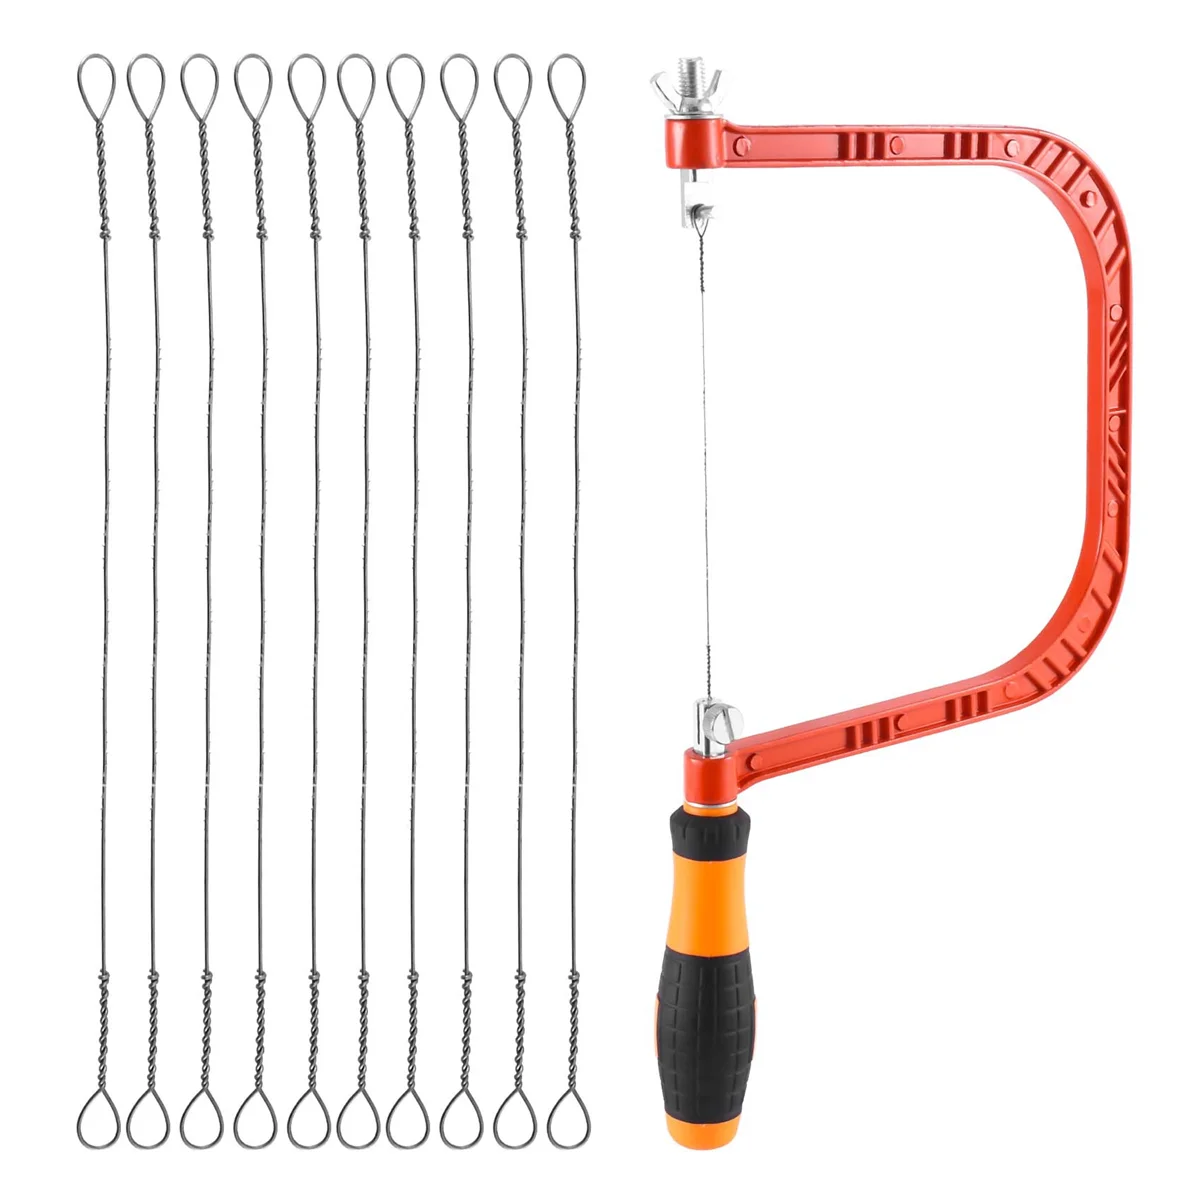 

6 Inch Coping Saw Hand Saw, Fret Saw Coping Frame and Extra 20 Pcs Replacement Blades Set for Wood,Plastic, Rubber, Ect